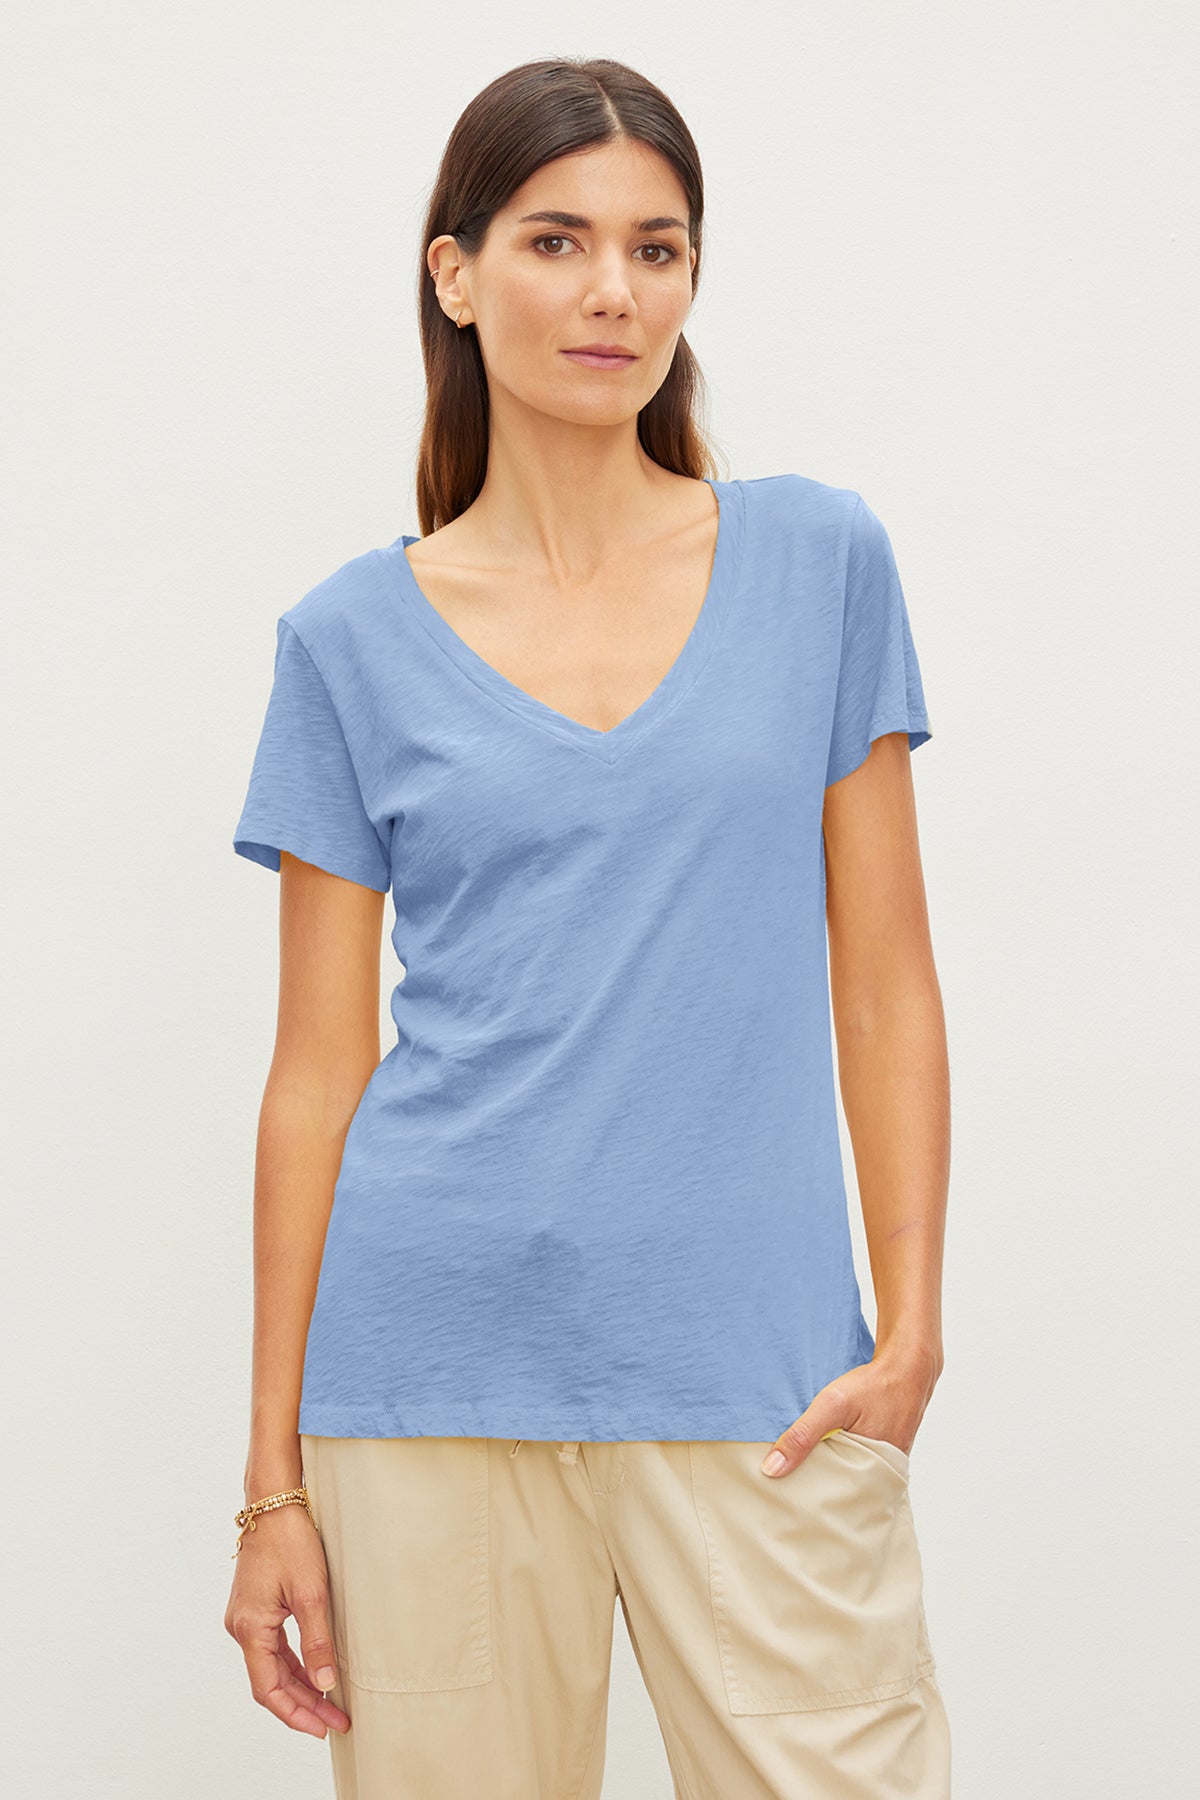   A woman with a tomboy style wearing a blue LILITH COTTON SLUB V-NECK TEE by Velvet by Graham & Spencer. 